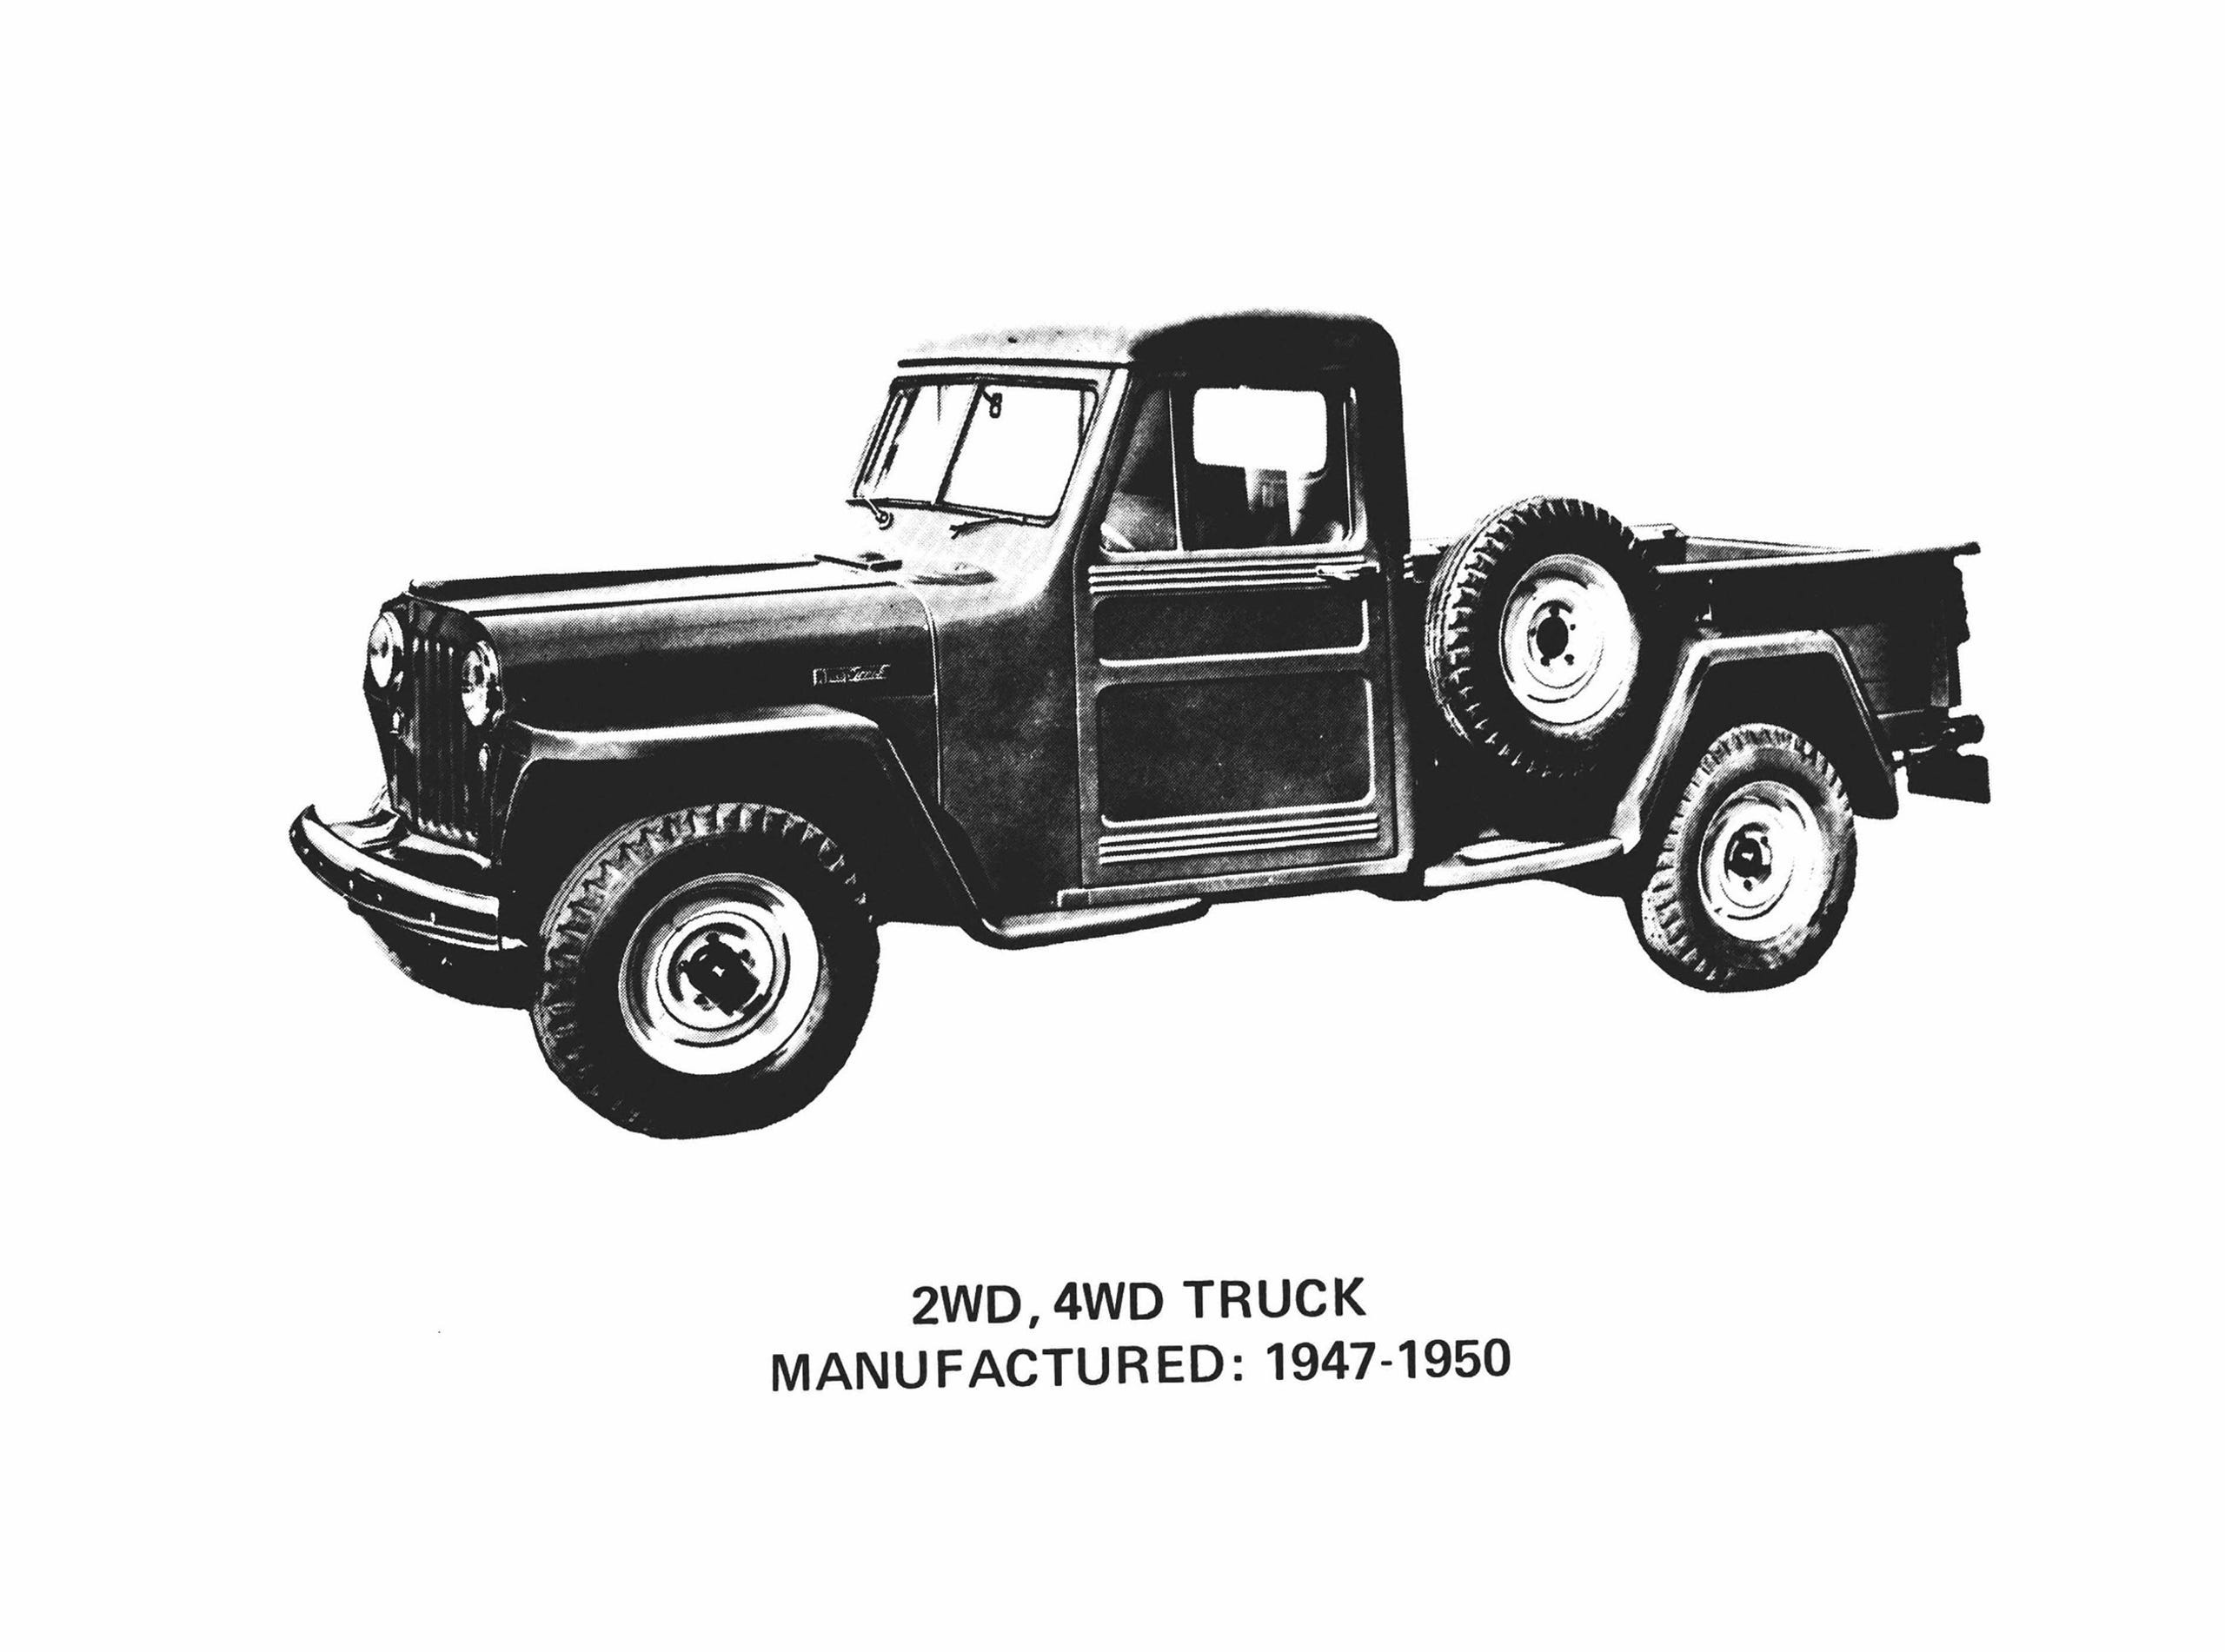 This is an illustration of a 1947 Jeep Pickup. Two-wheel-drive and four-wheel-drive versions were manufactured from 1947-50.